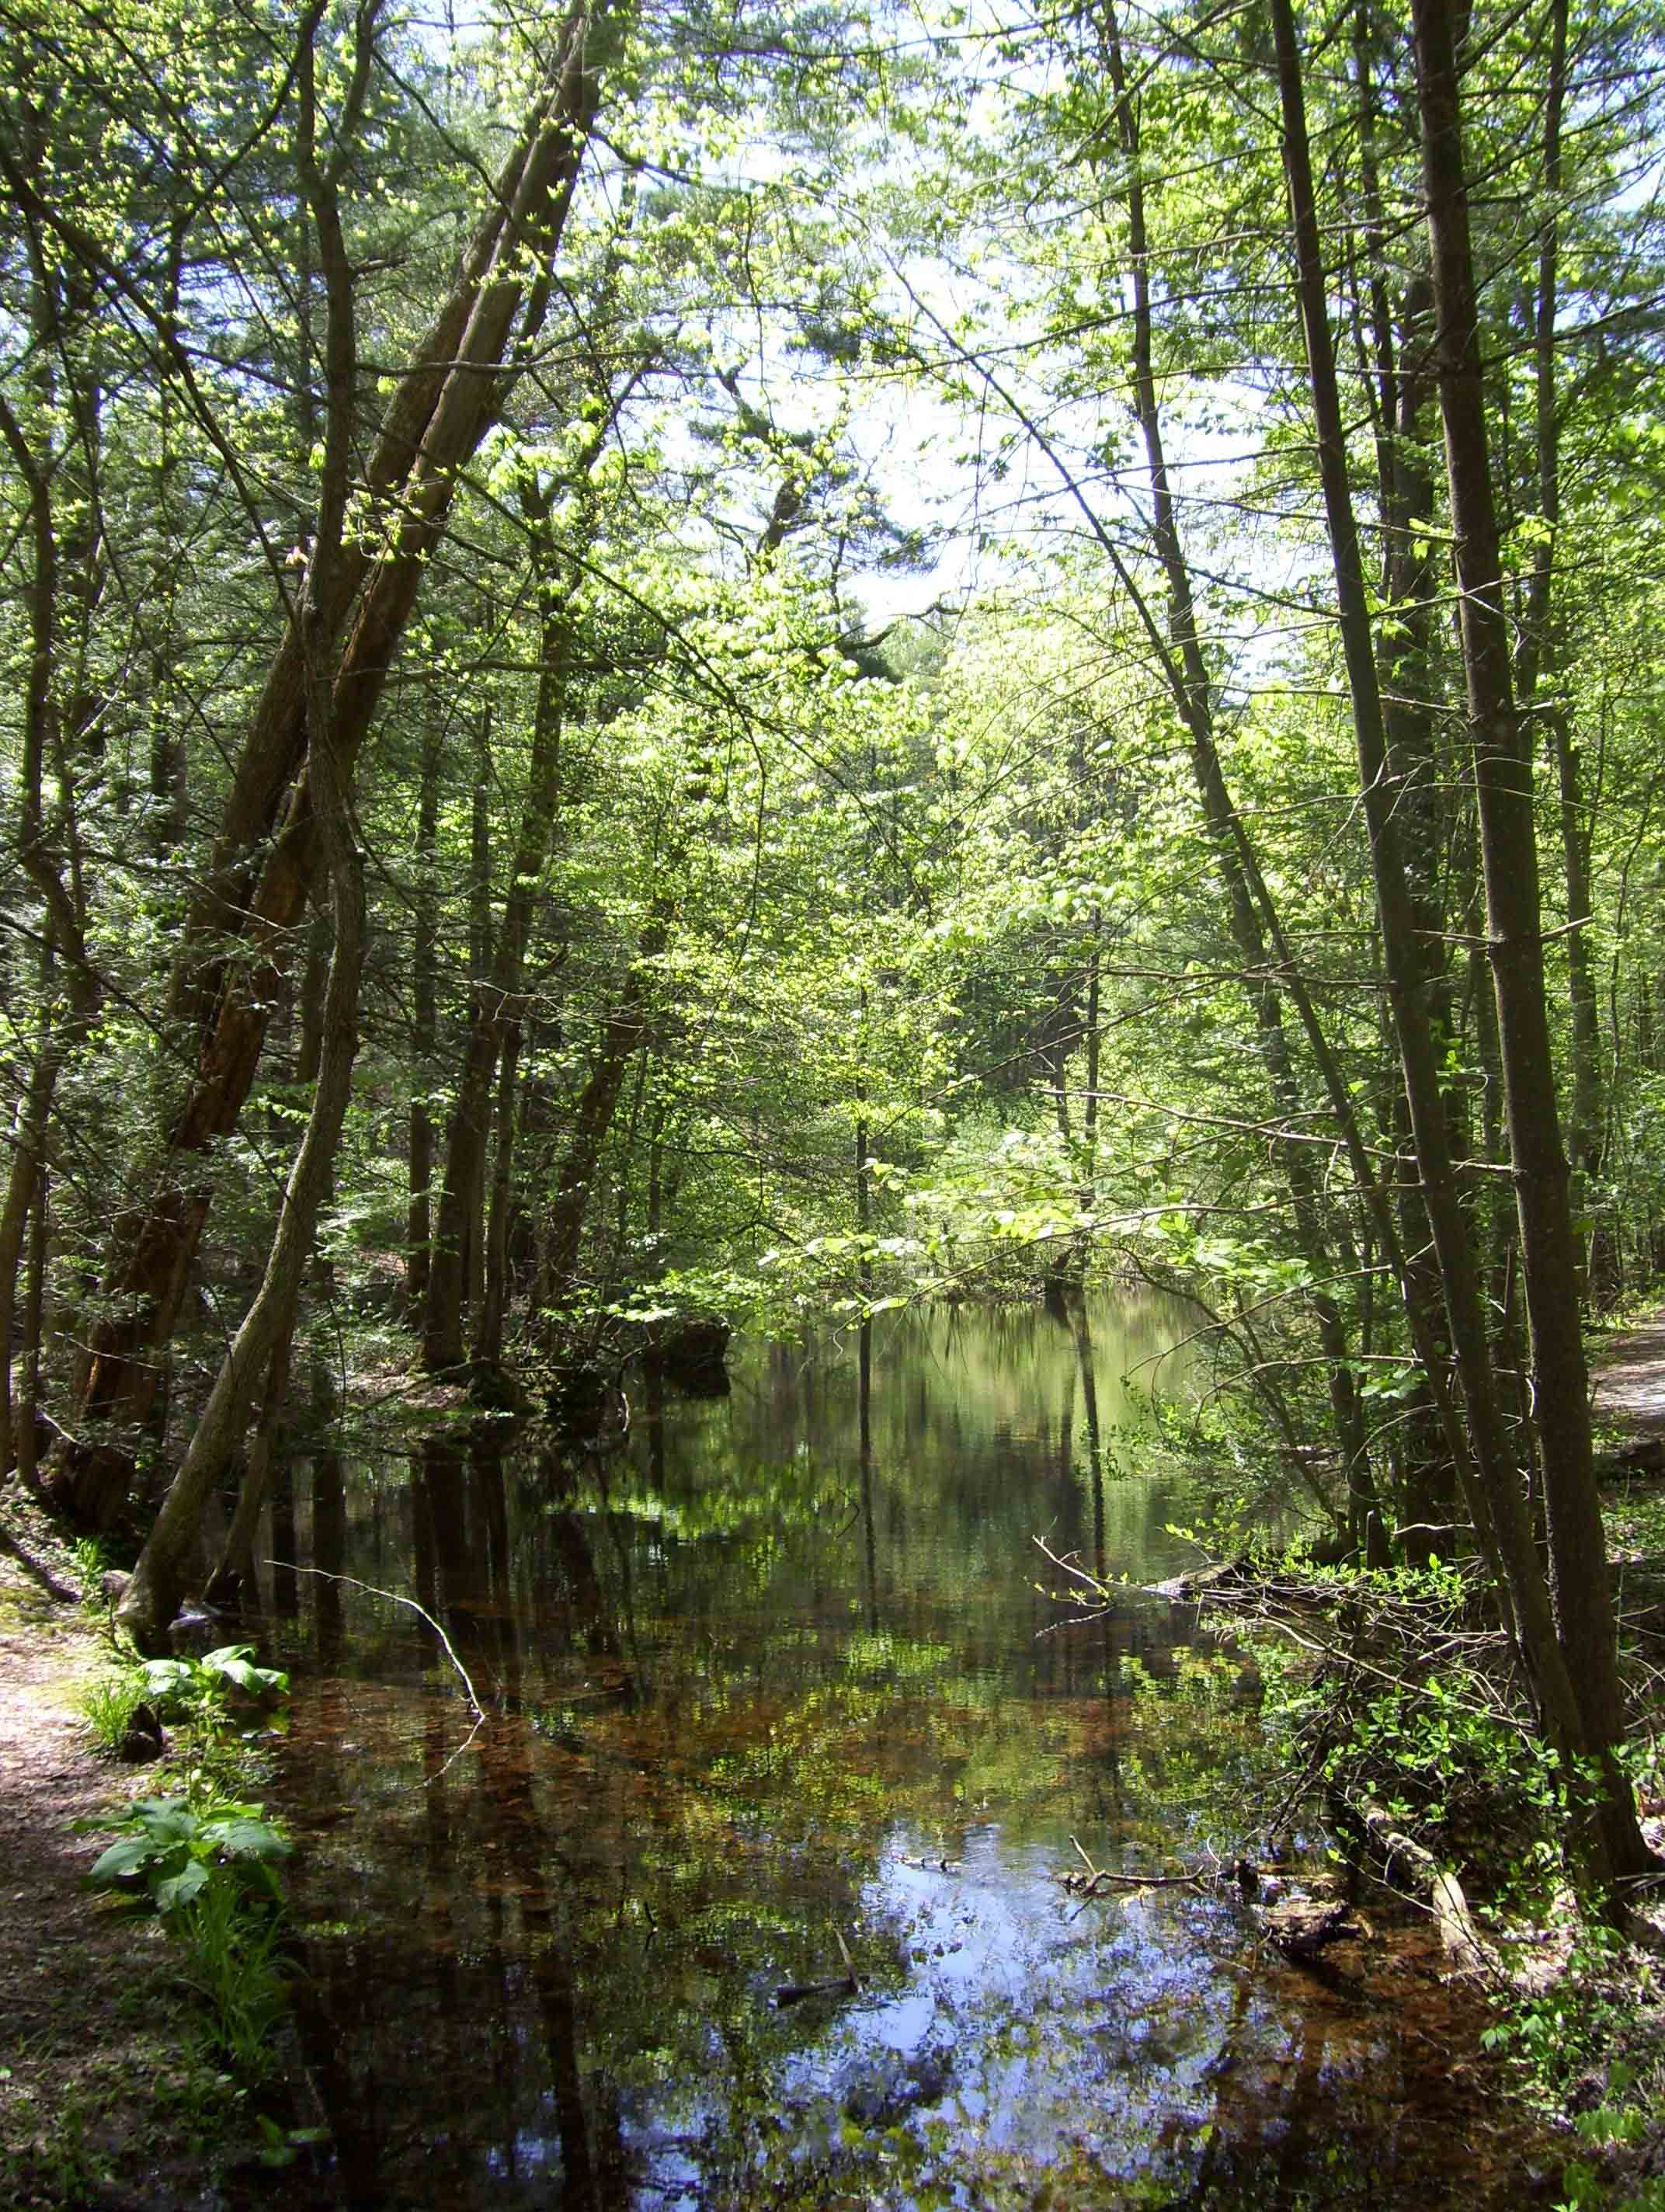 A springtime view taken near the junction with the Swamp Trail. Taken at approx. MM 9.8.  Courtesy dlcul@conncoll.edu